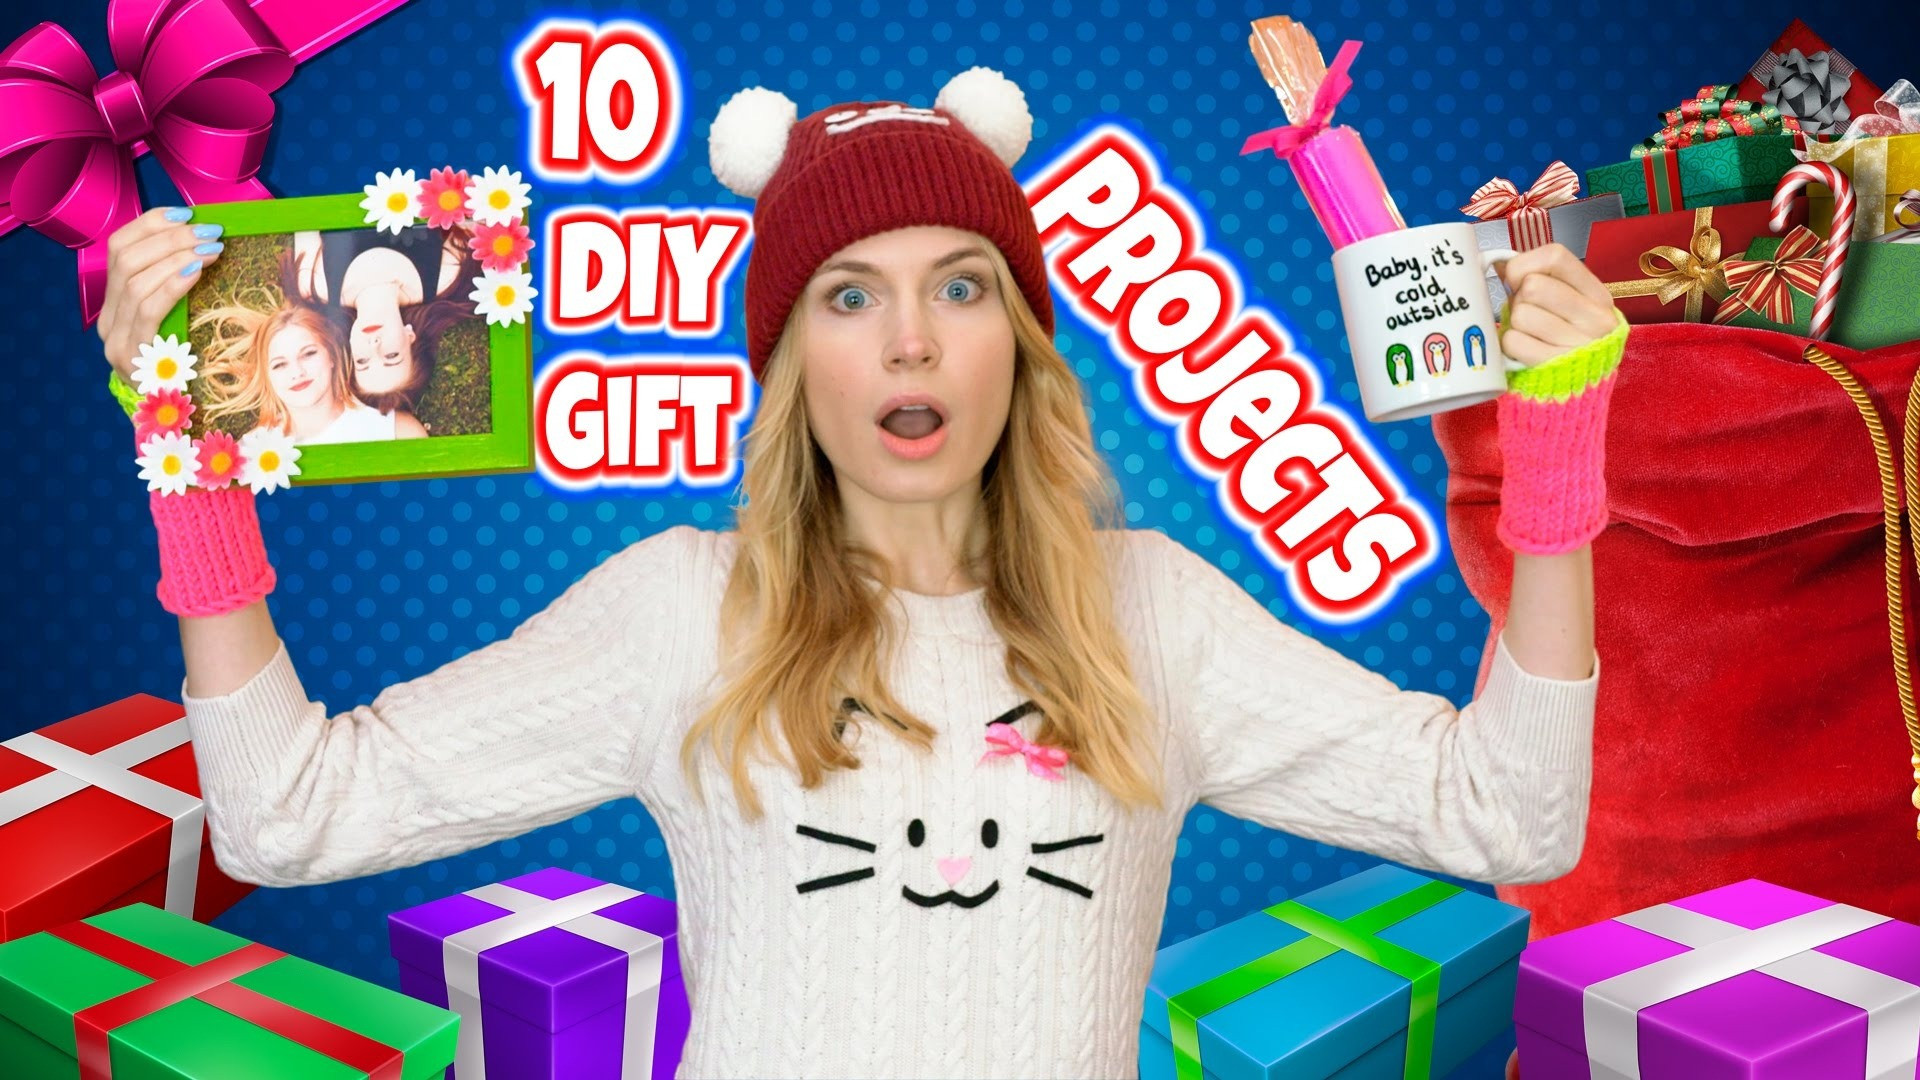 Birthday Gift Ideas For 20 Year Old Female
 Christmas Gifts For 20 Year Old Female